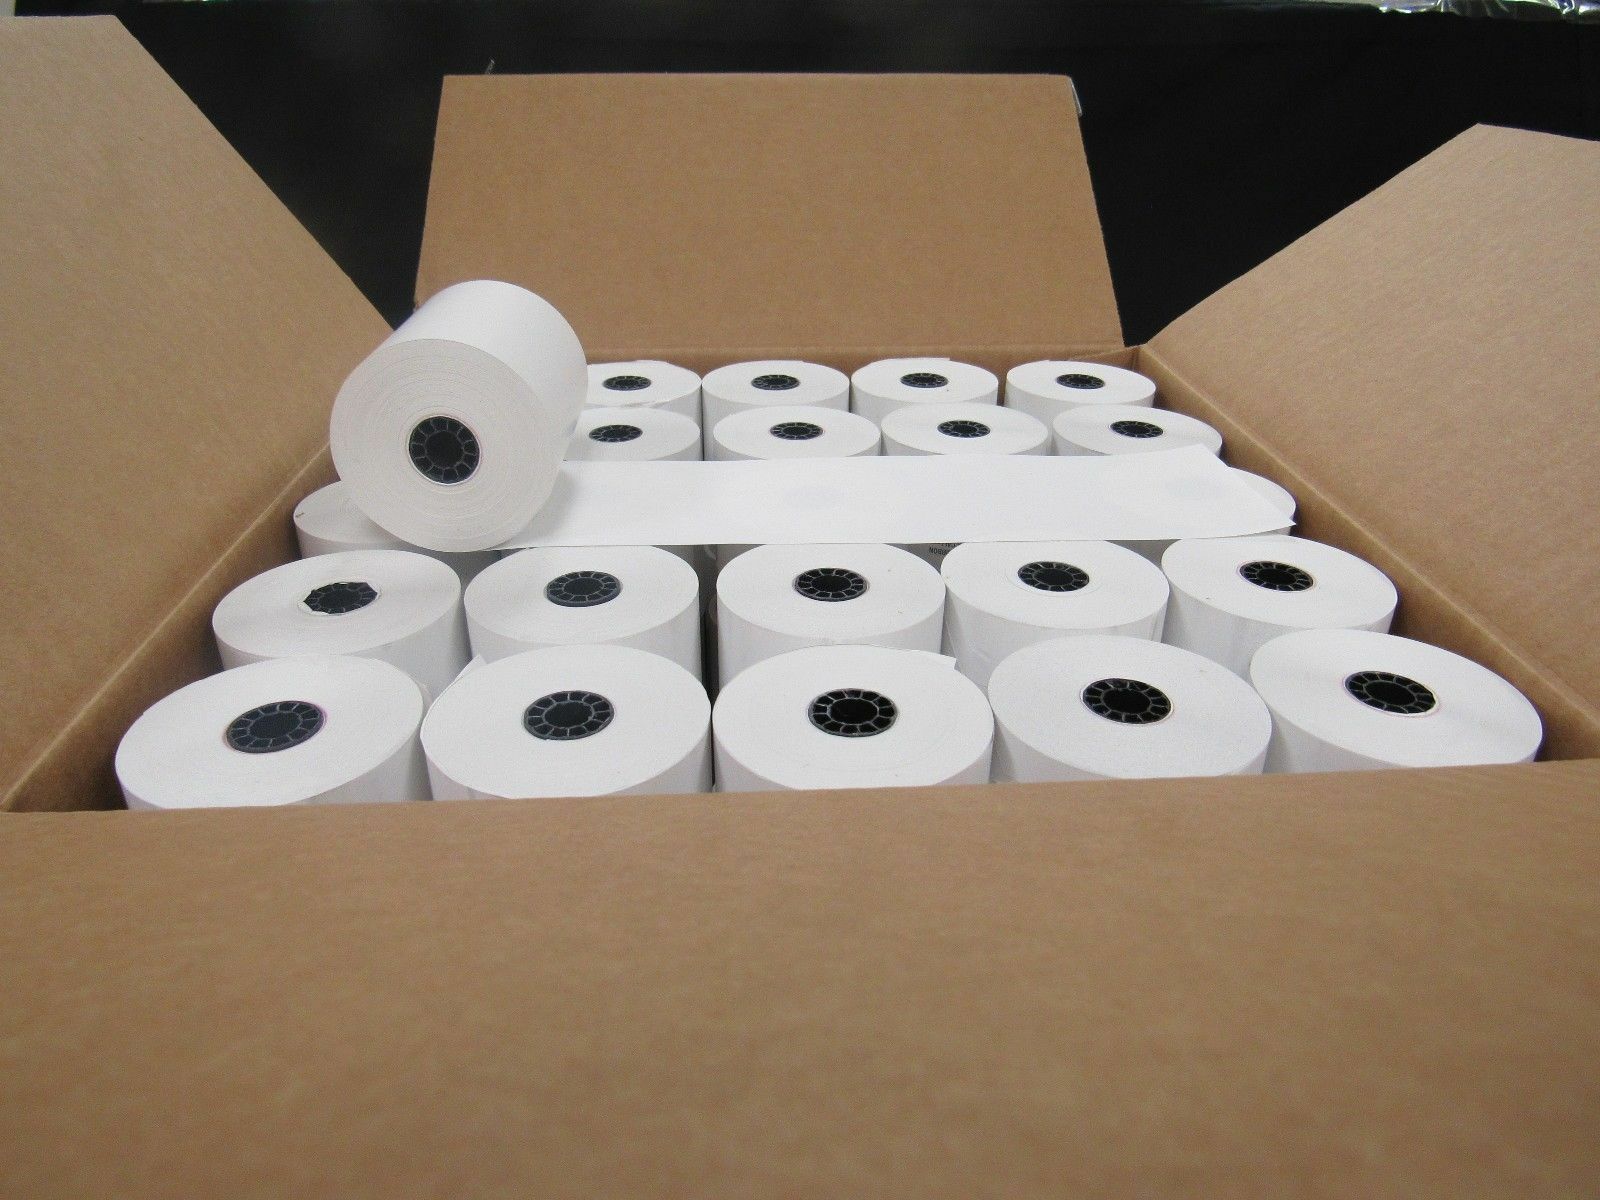 2 1/4 X 230' Thermal Receipt Paper-50 Rolls **free Shipping**